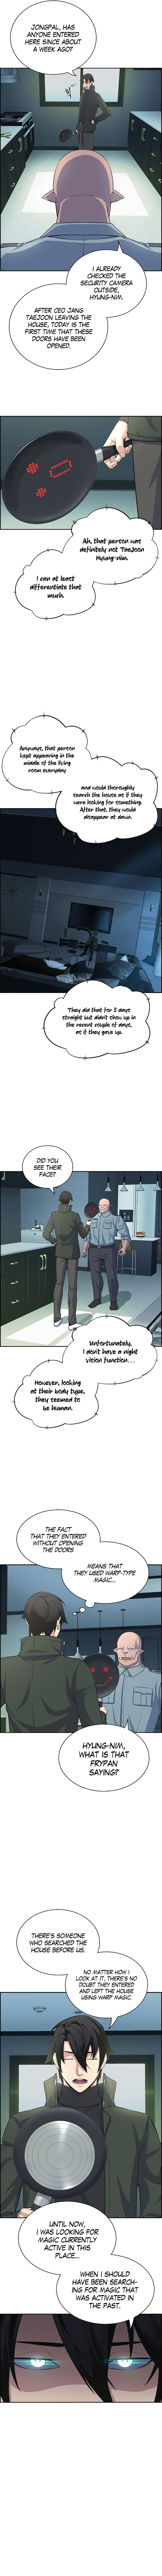 Foreigner on the Periphery - Chapter 4 Page 6